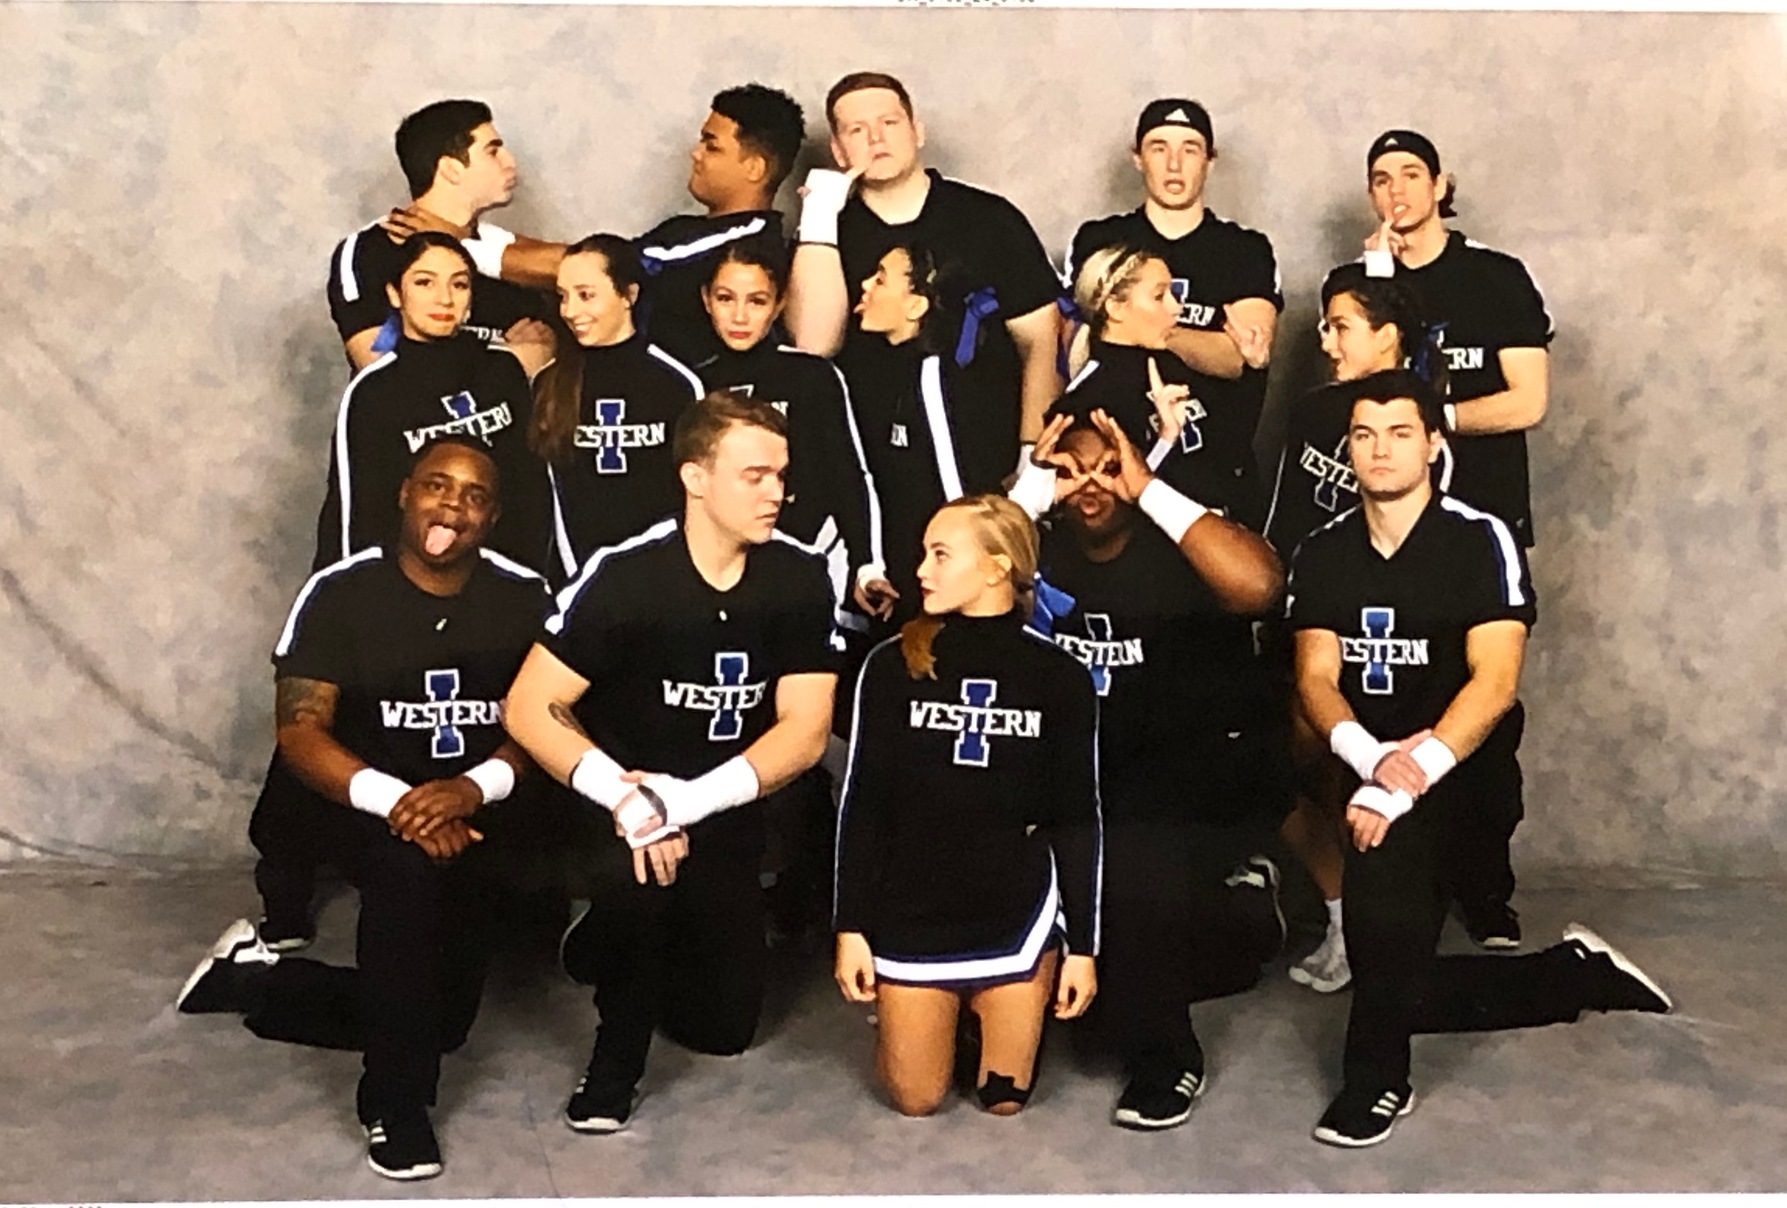 Reiver Cheer brings it at National competition